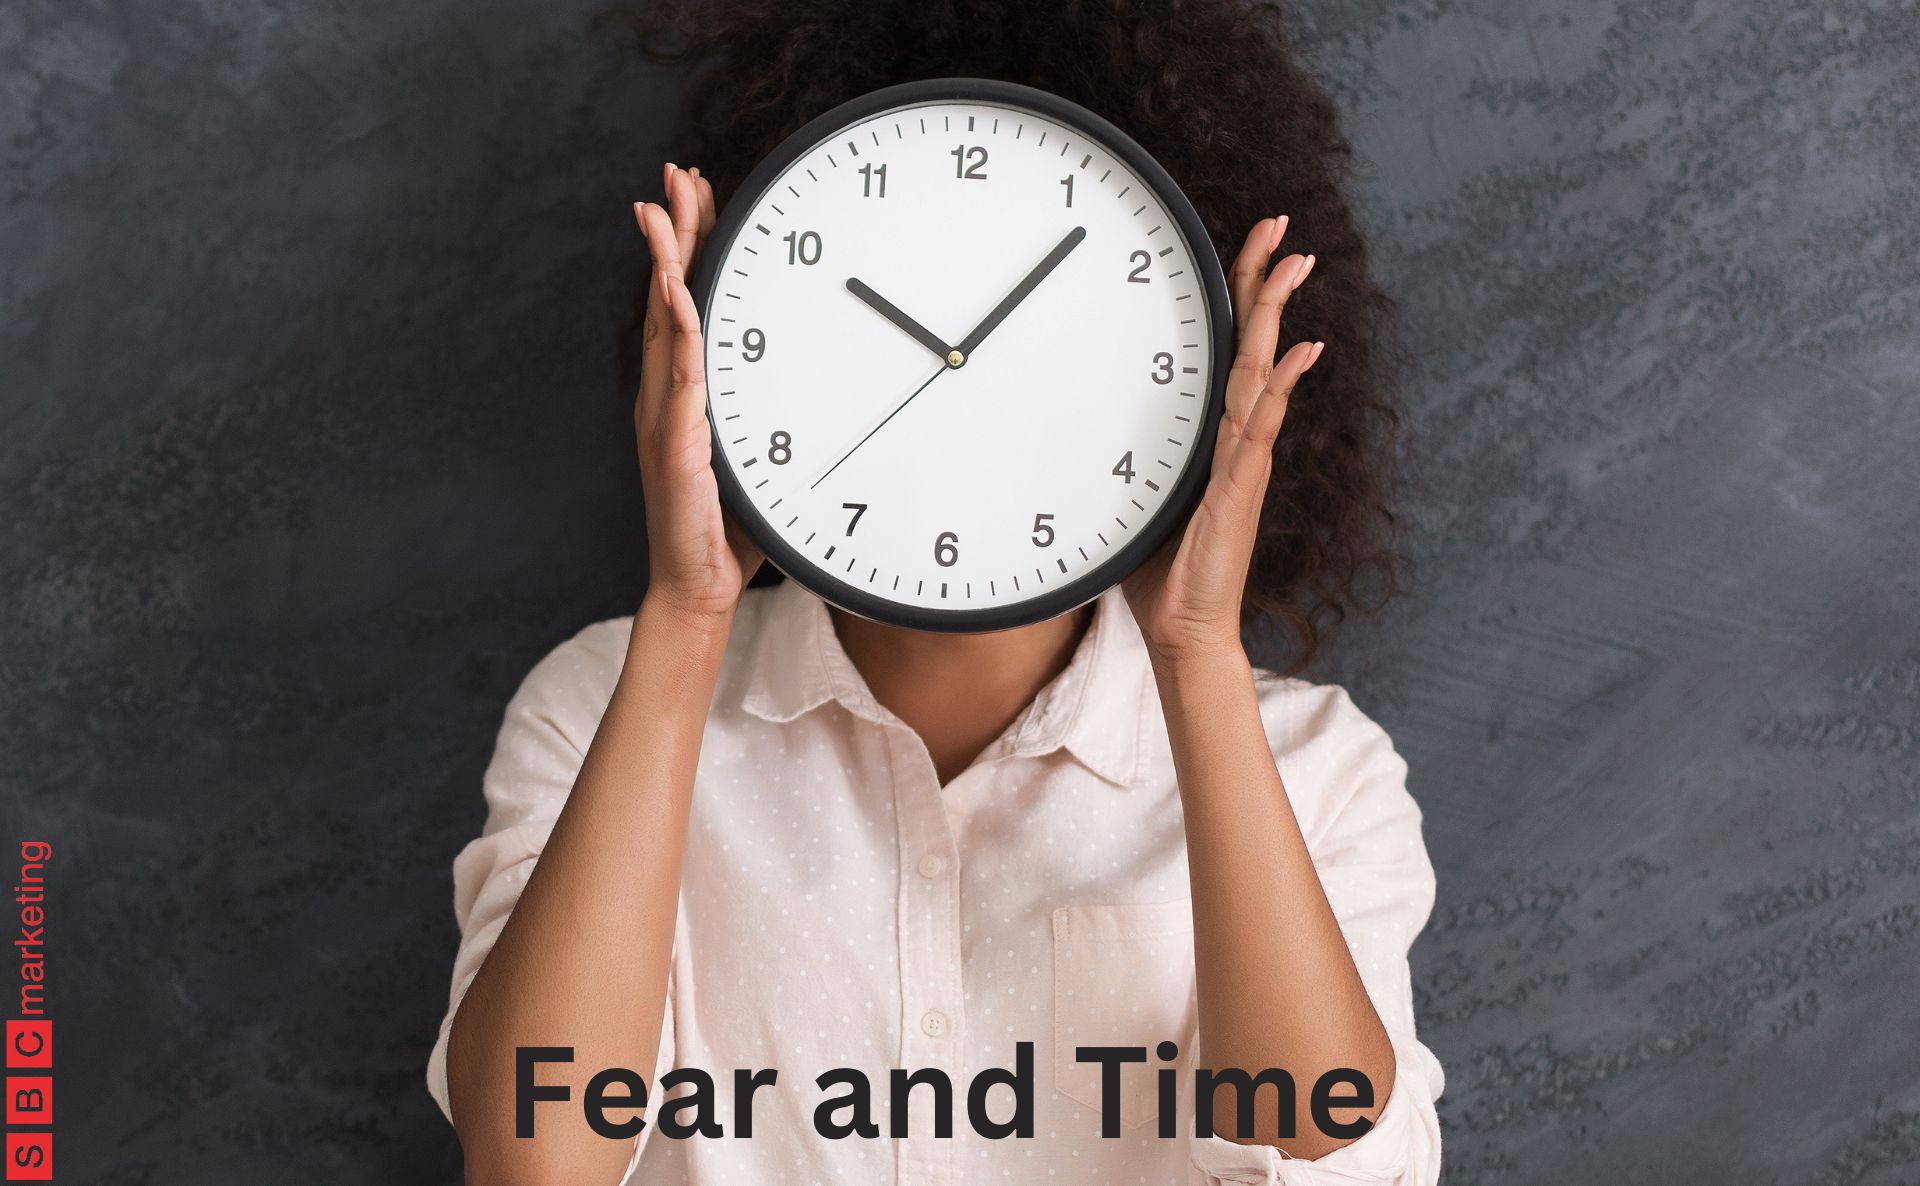 Fear and Time - SBC Marketing London